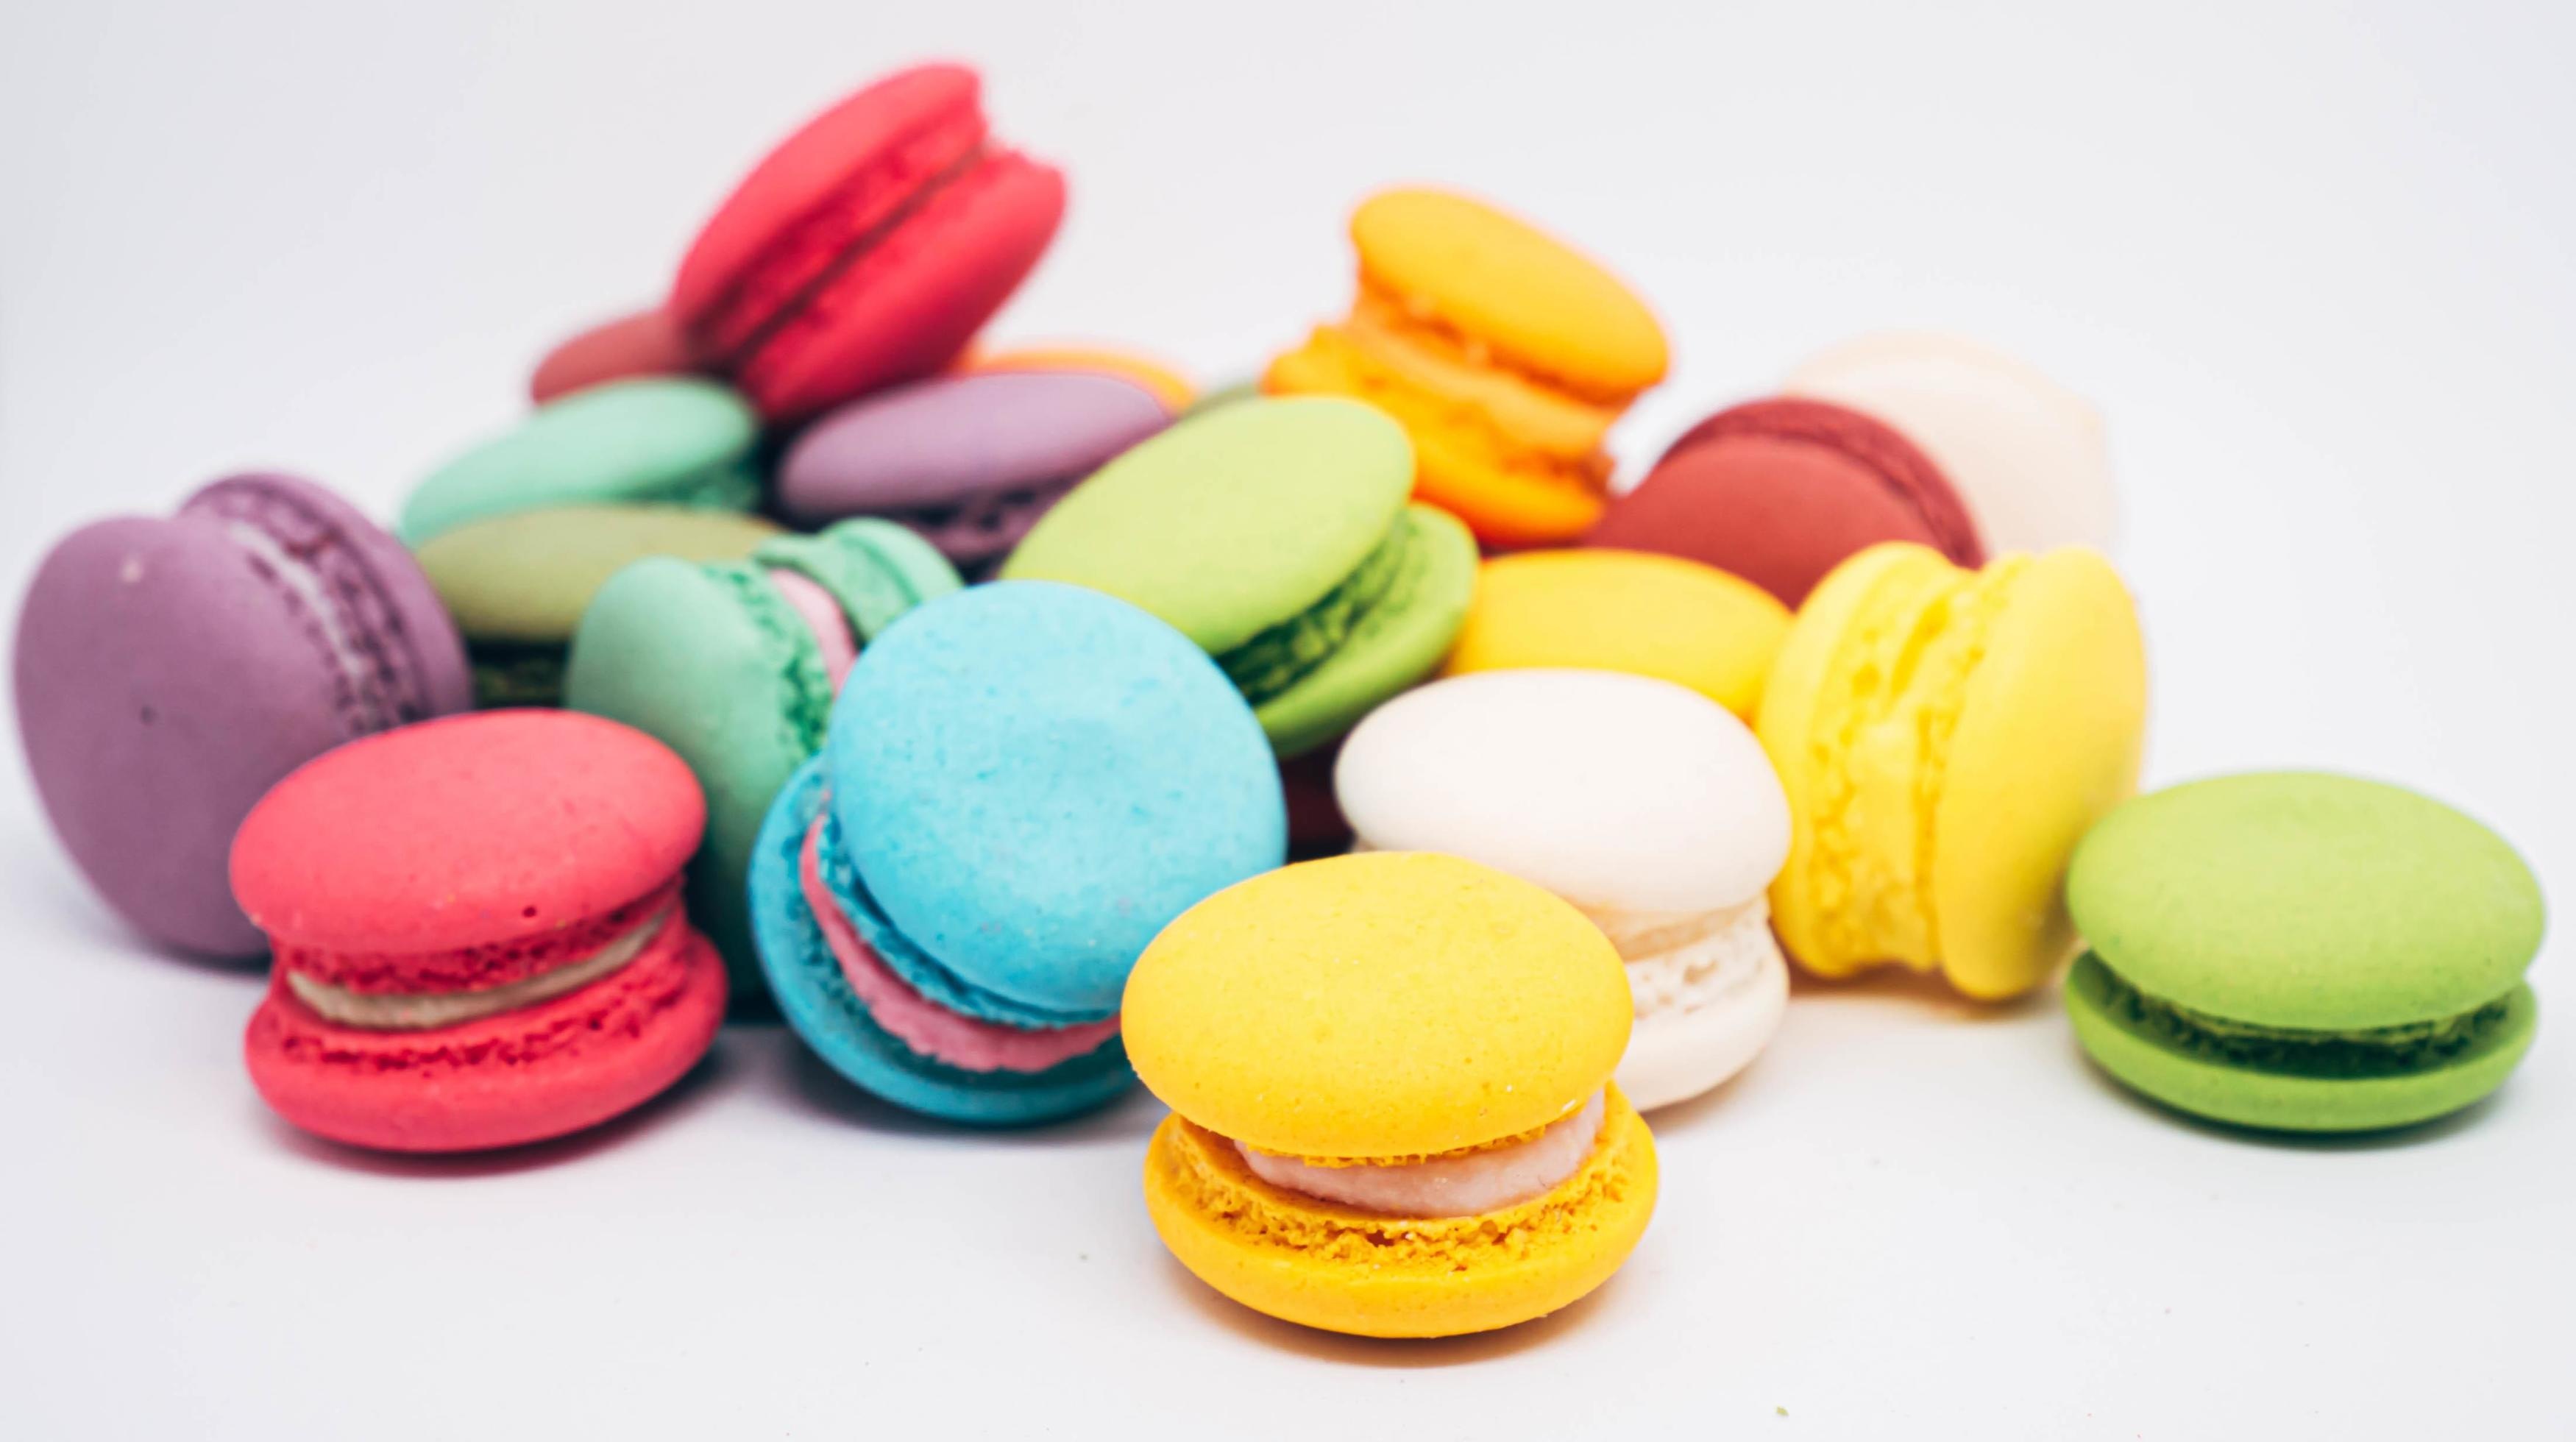 Macaron: The French or Parisian egg white foam-based cookie. 3510x1960 HD Background.